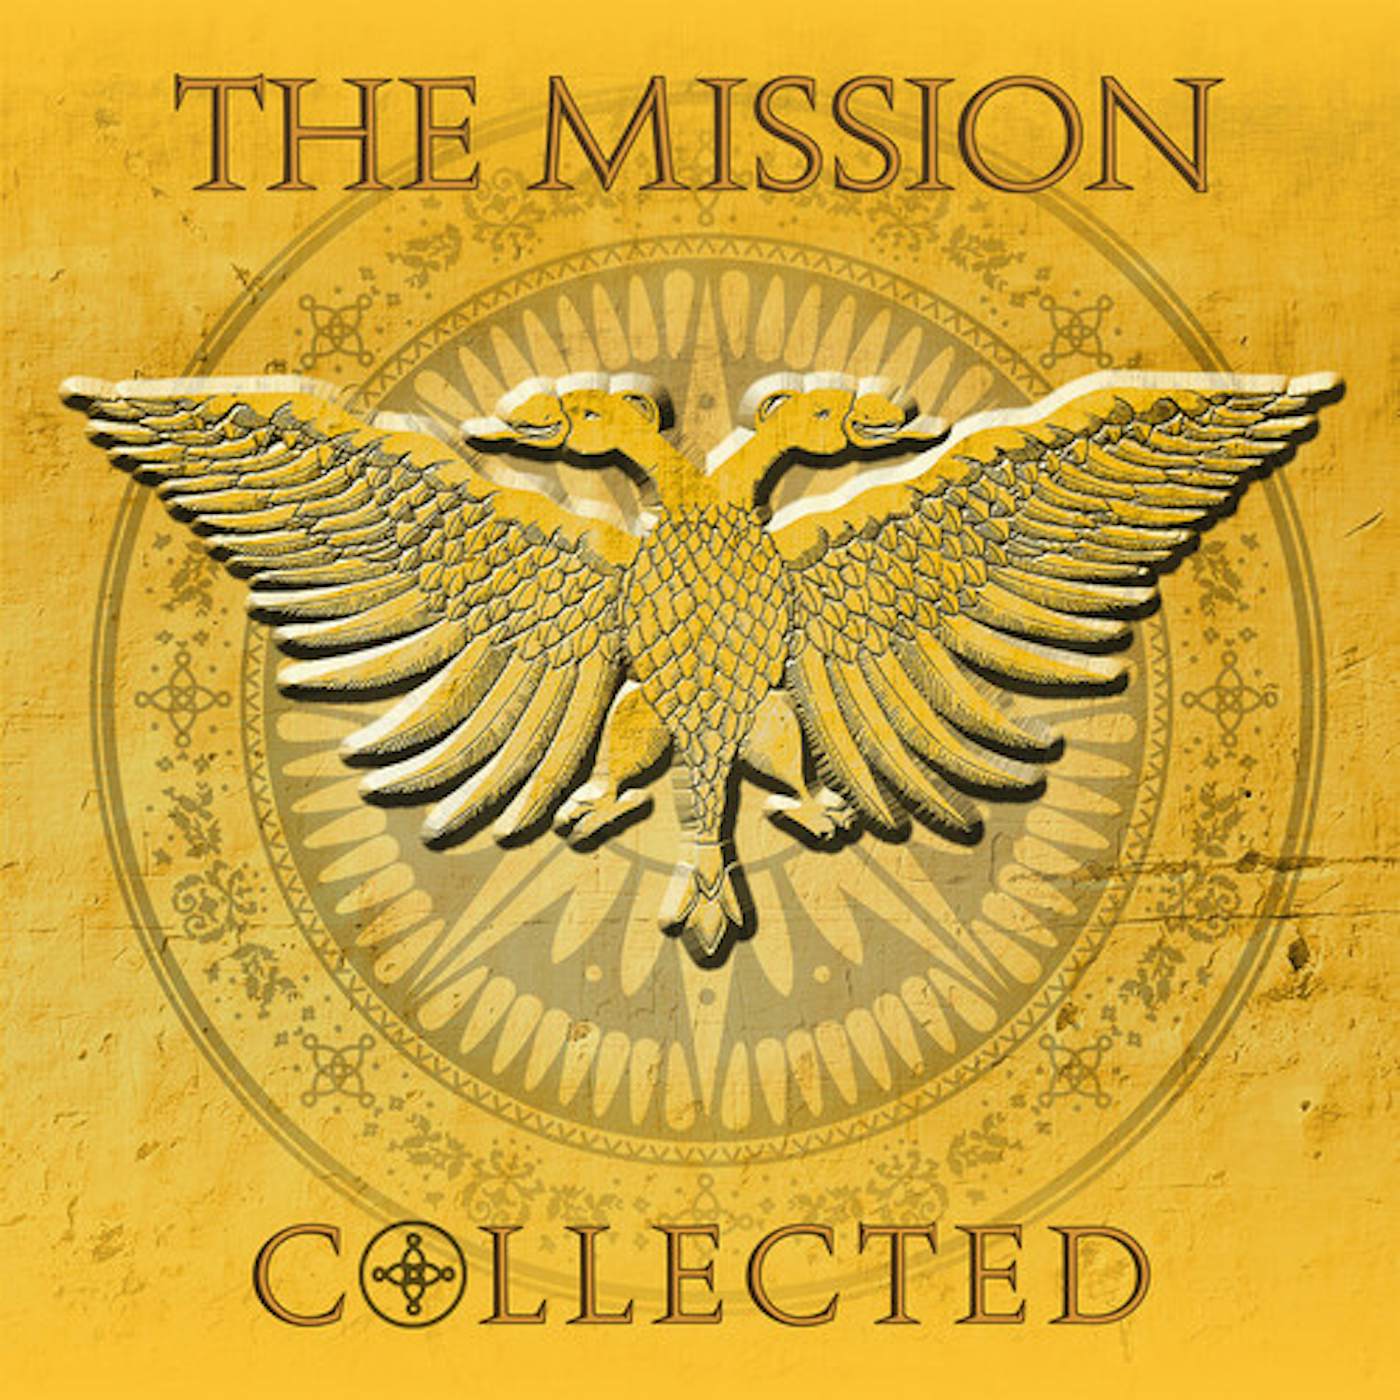 The Mission Collected Vinyl Record